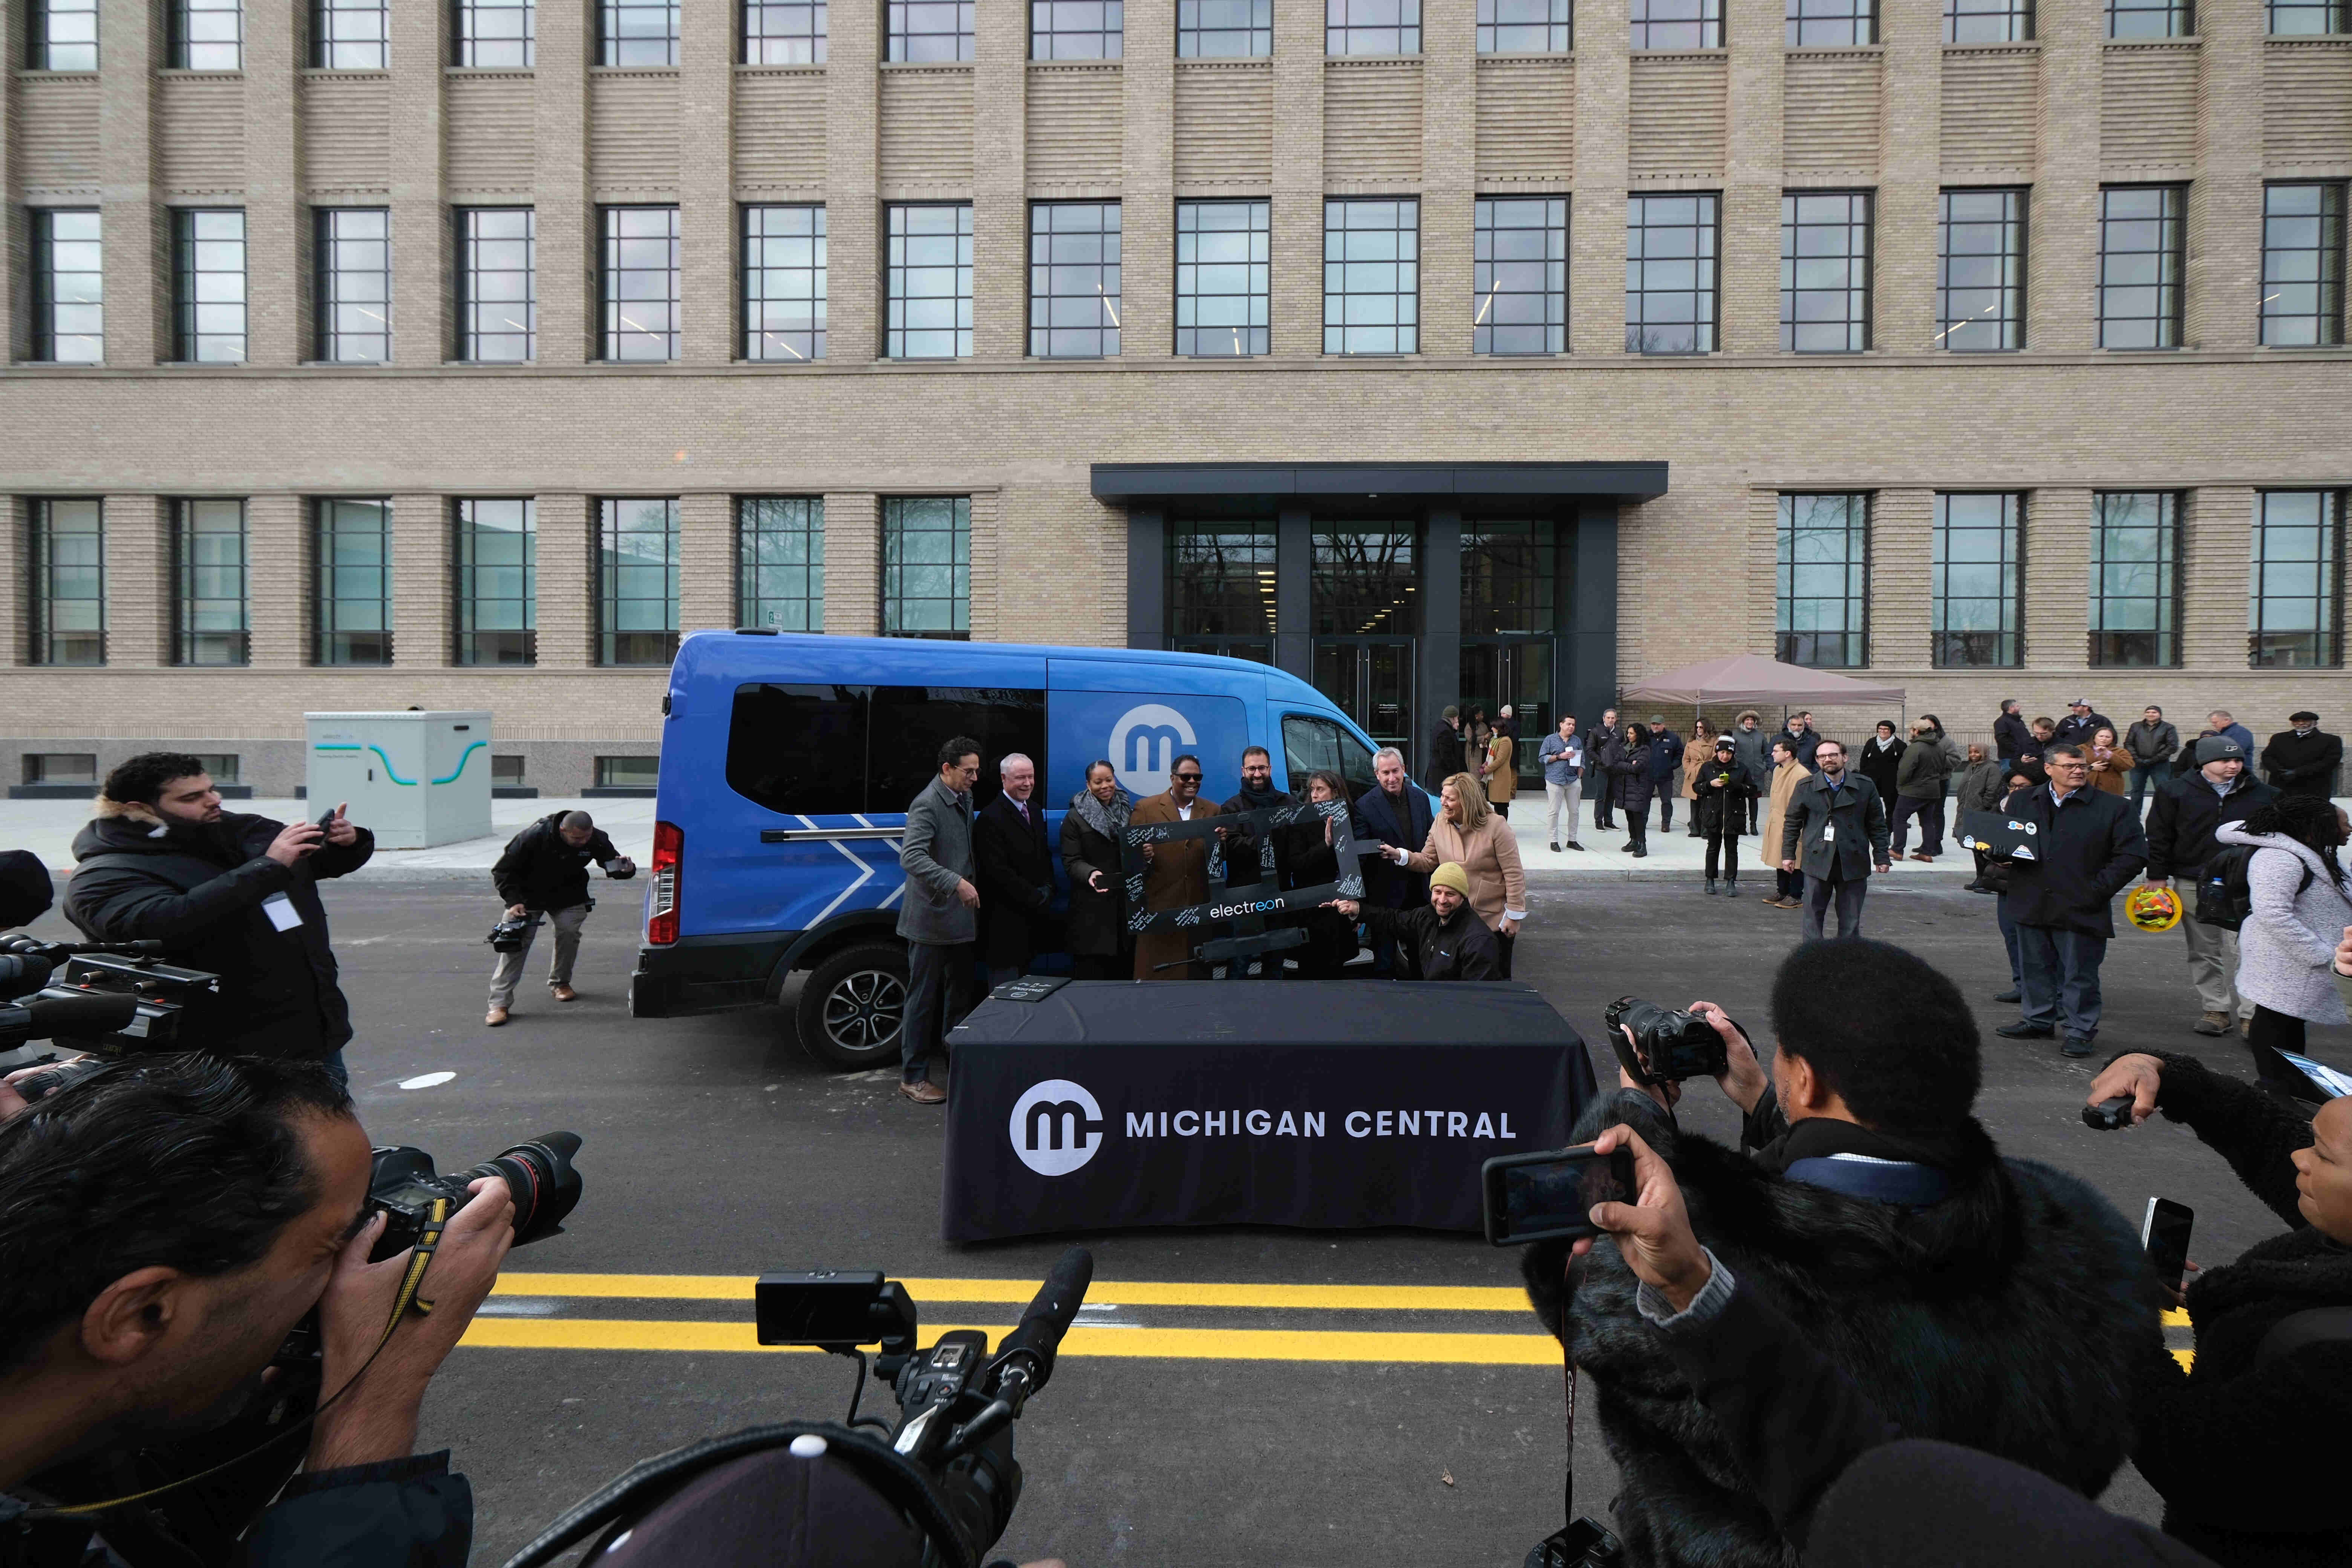 A press event around an blue van unveiling Electreon's first wireless charging road in Michigan. 